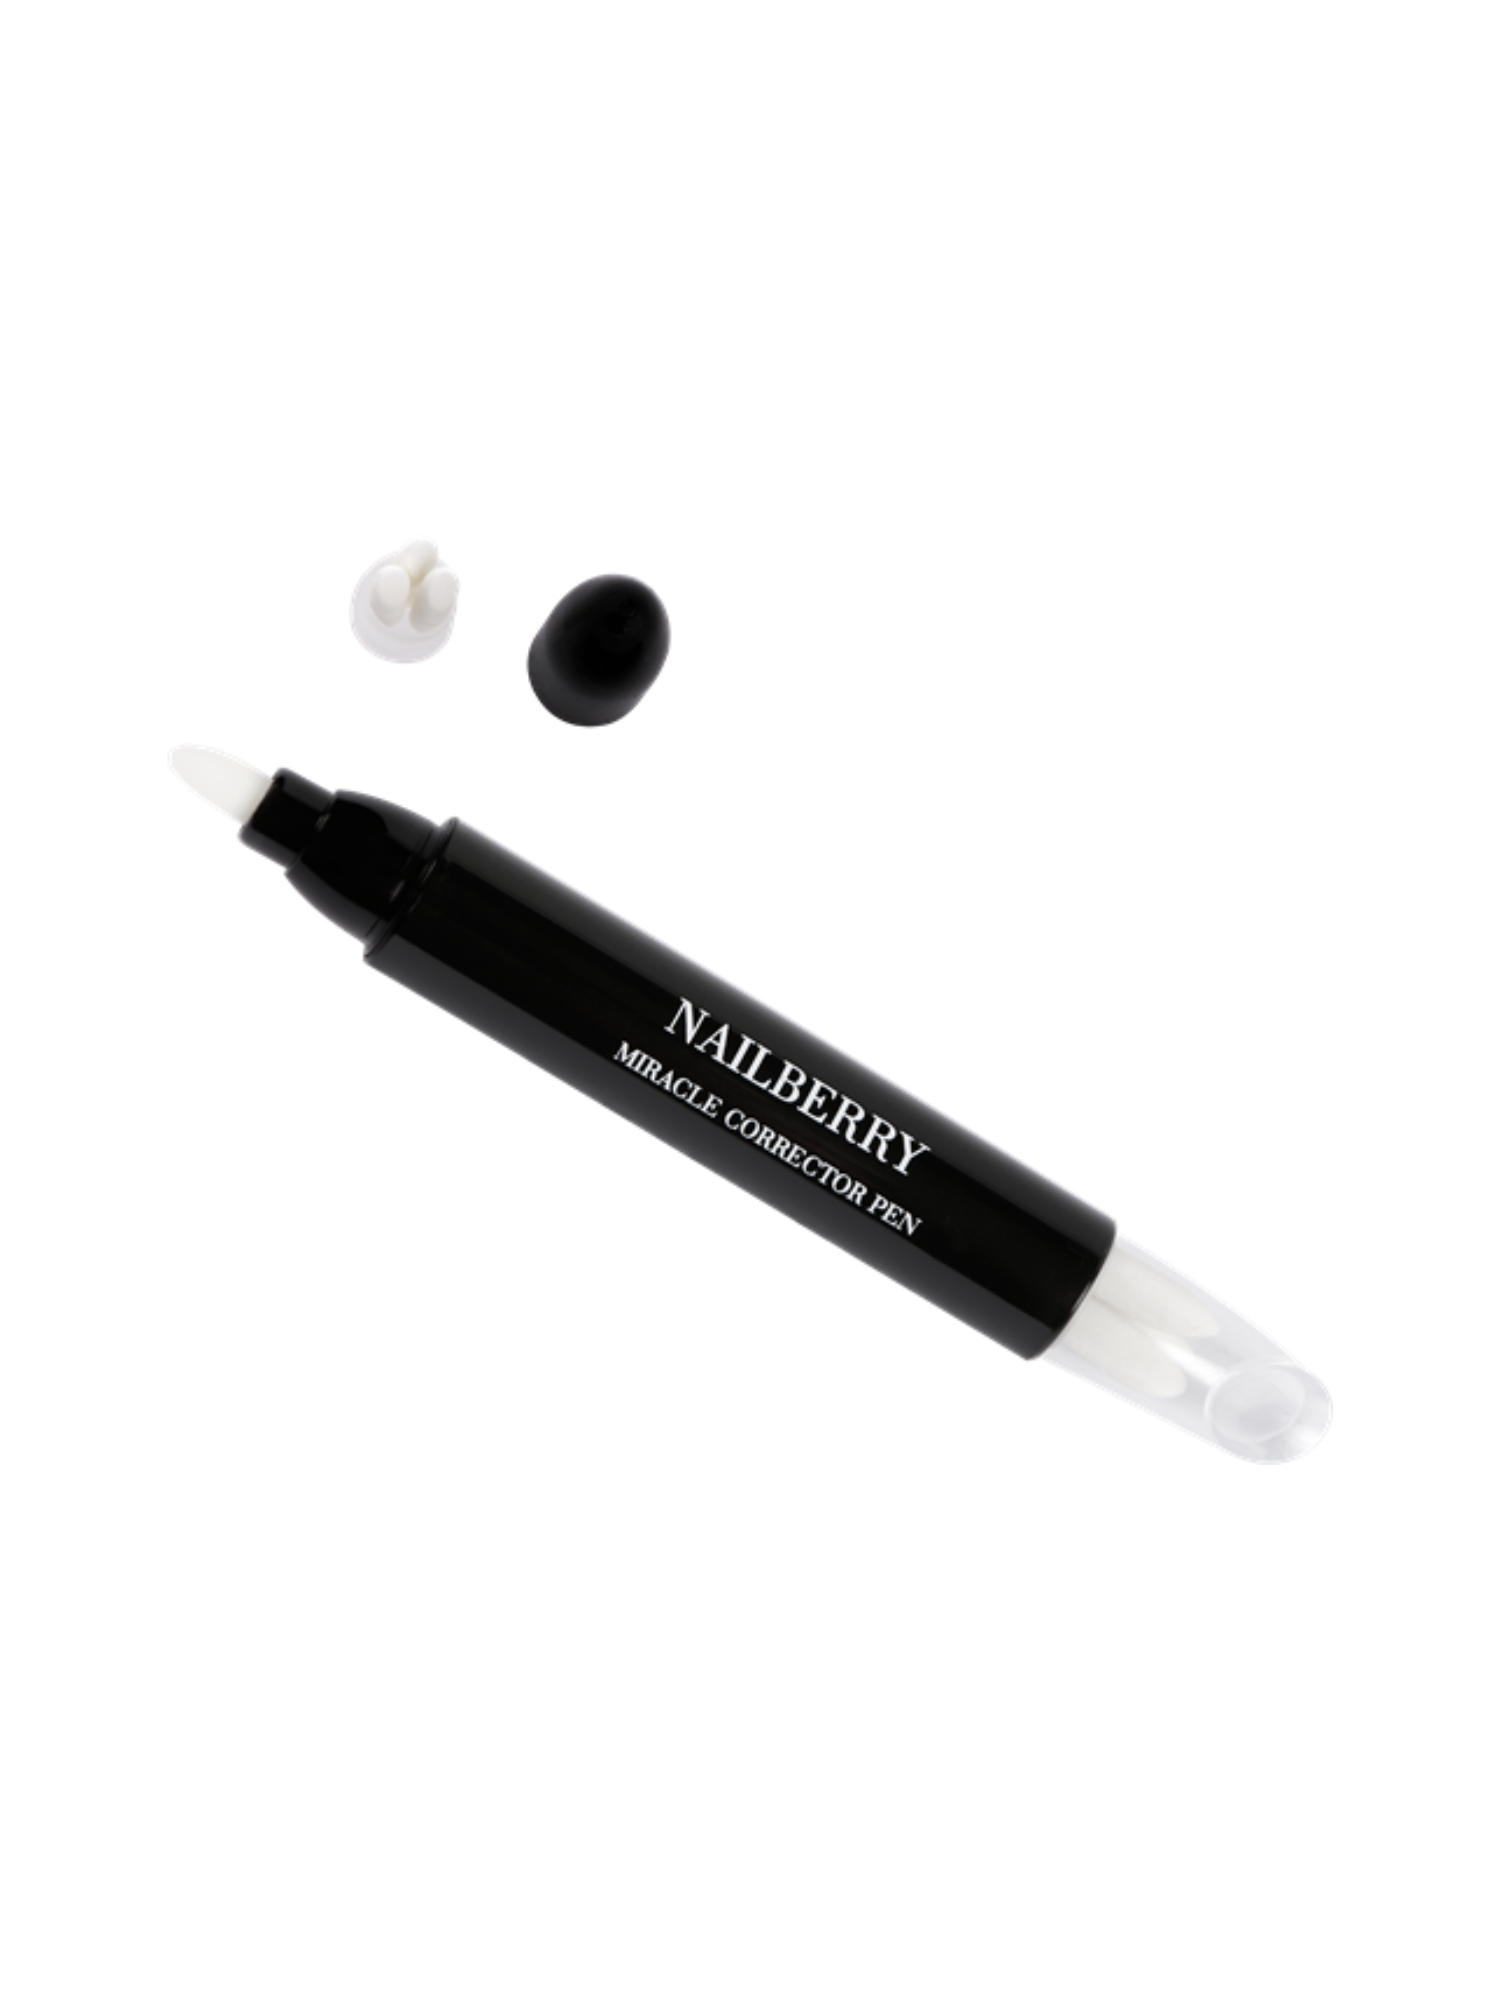 Corrector pen.Acetone free. Nail polish remover. Nailberry. Nourished